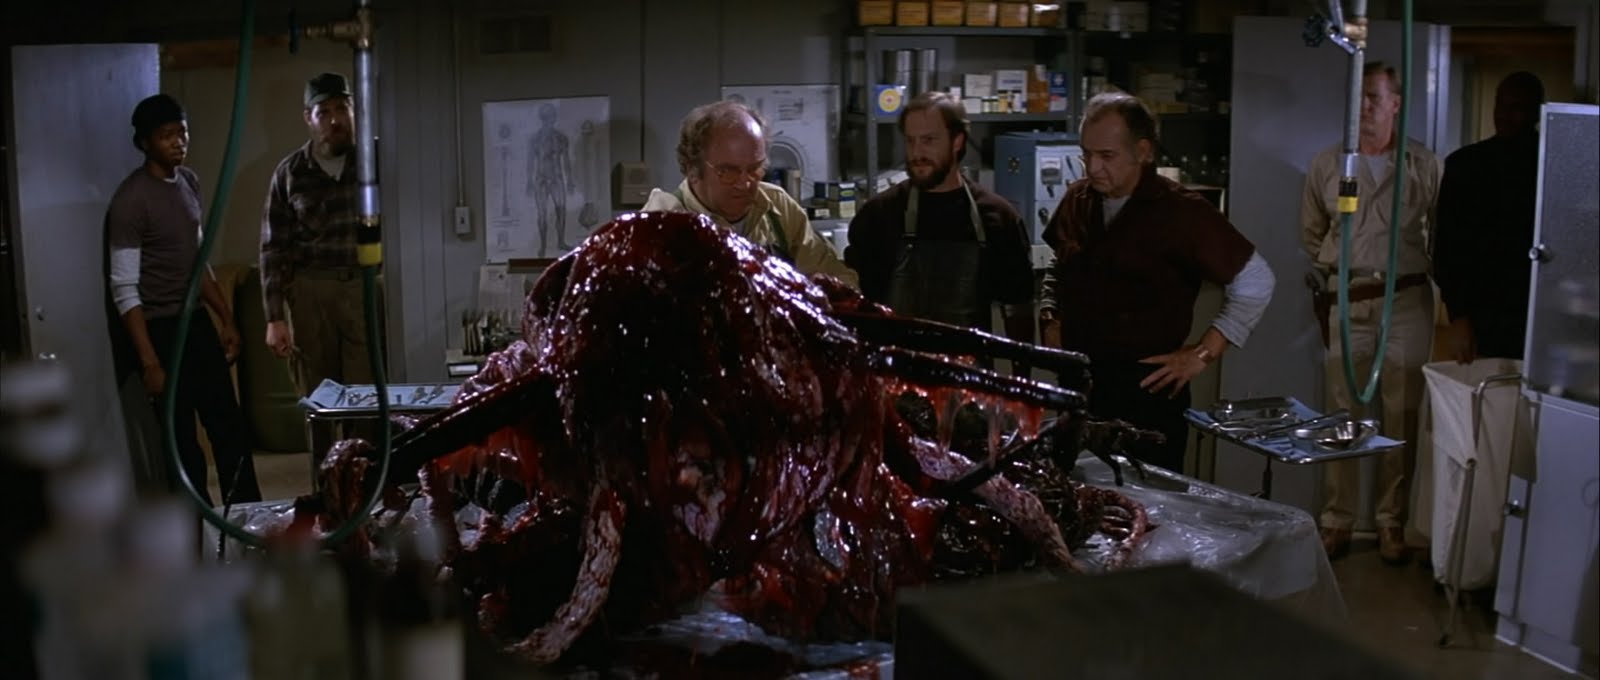 Amazing The Thing (1982) Pictures & Backgrounds